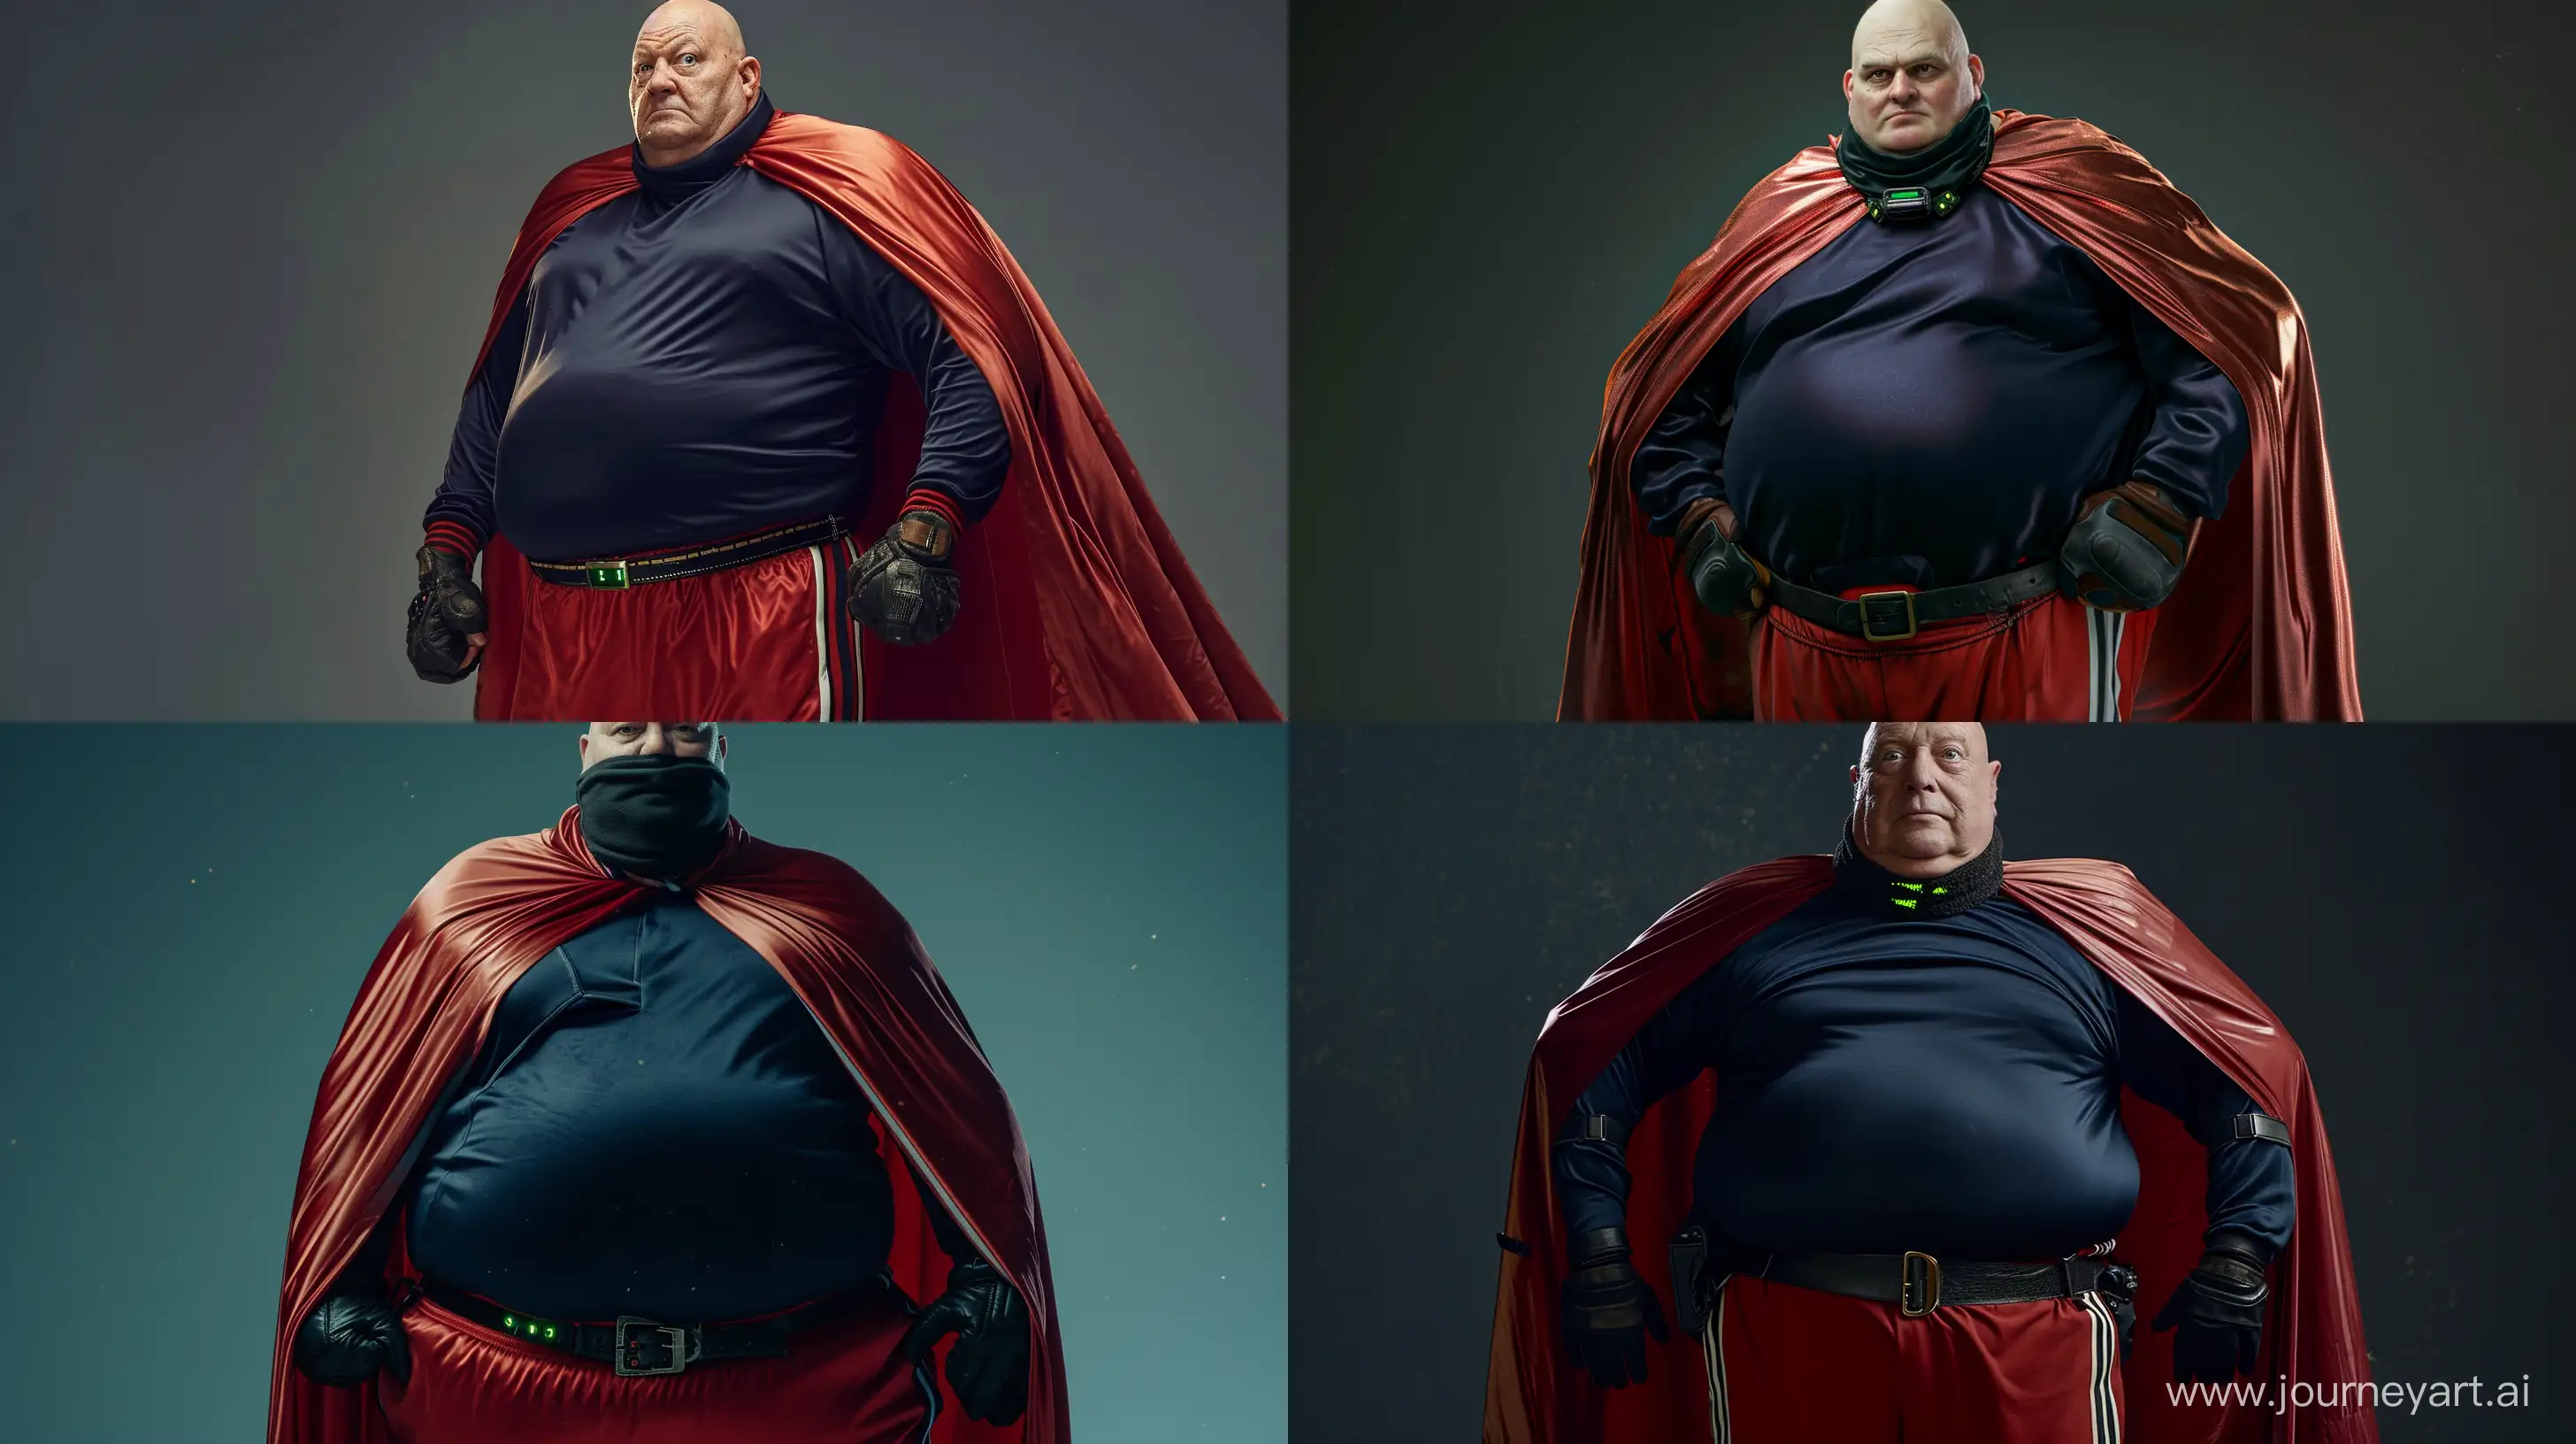 Elderly-Superhero-in-Stylish-Navy-Tracksuit-and-Red-Cape